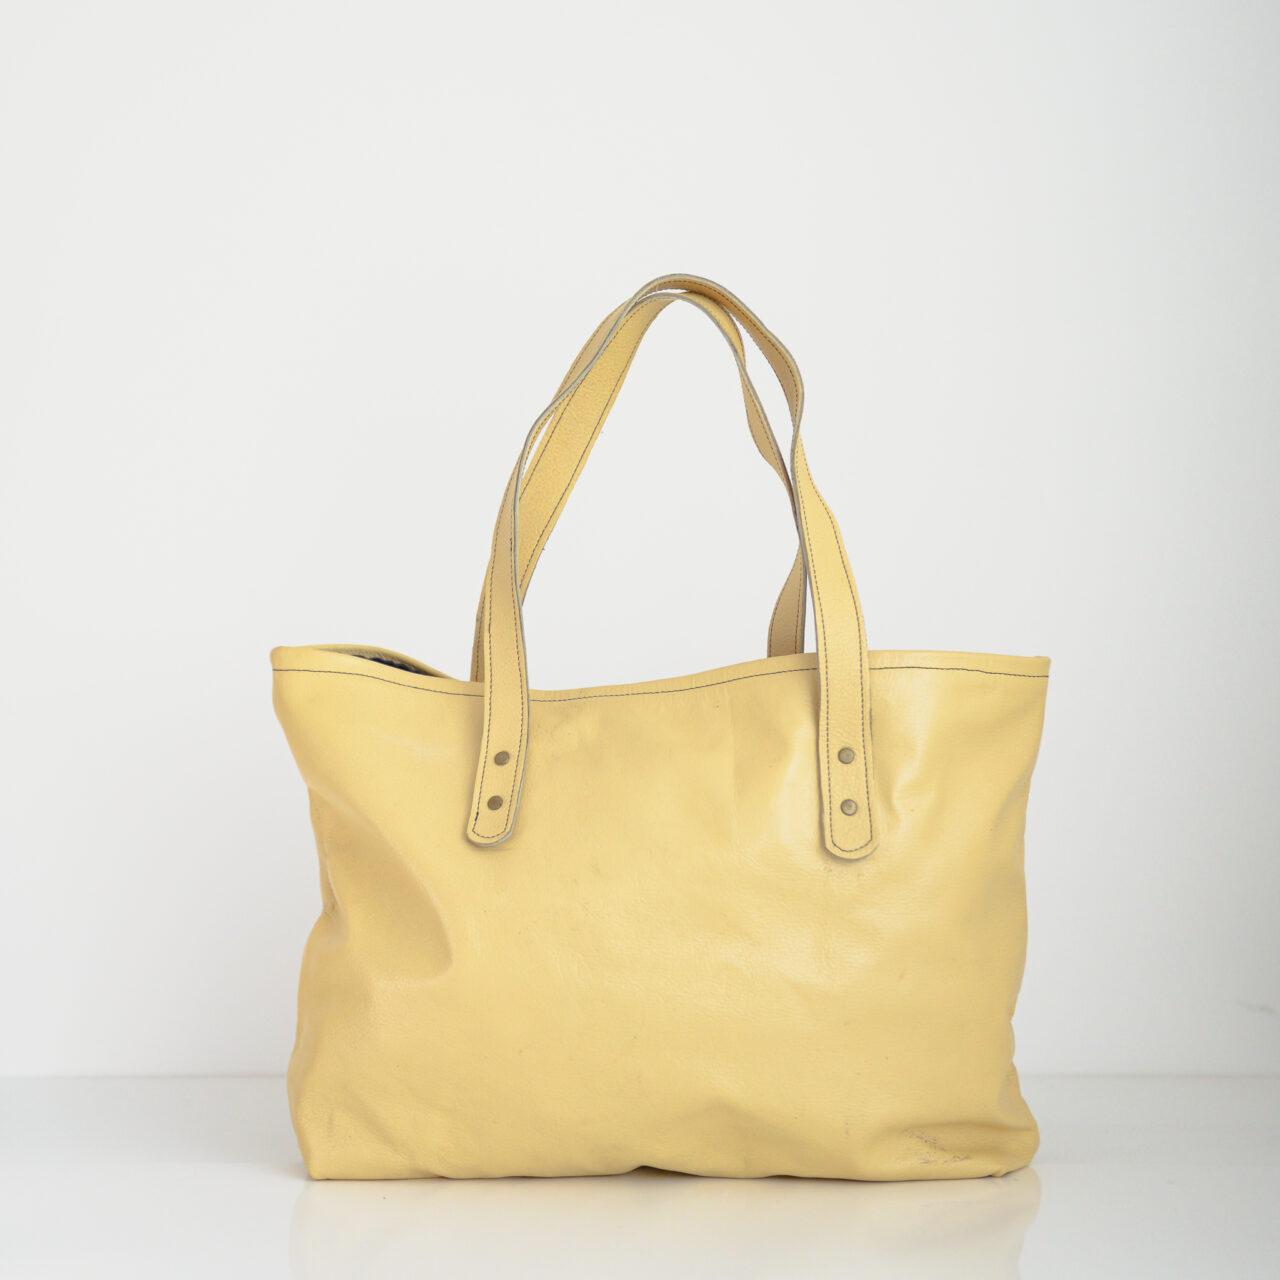 Yellow reclaimed leather tote bag/purse